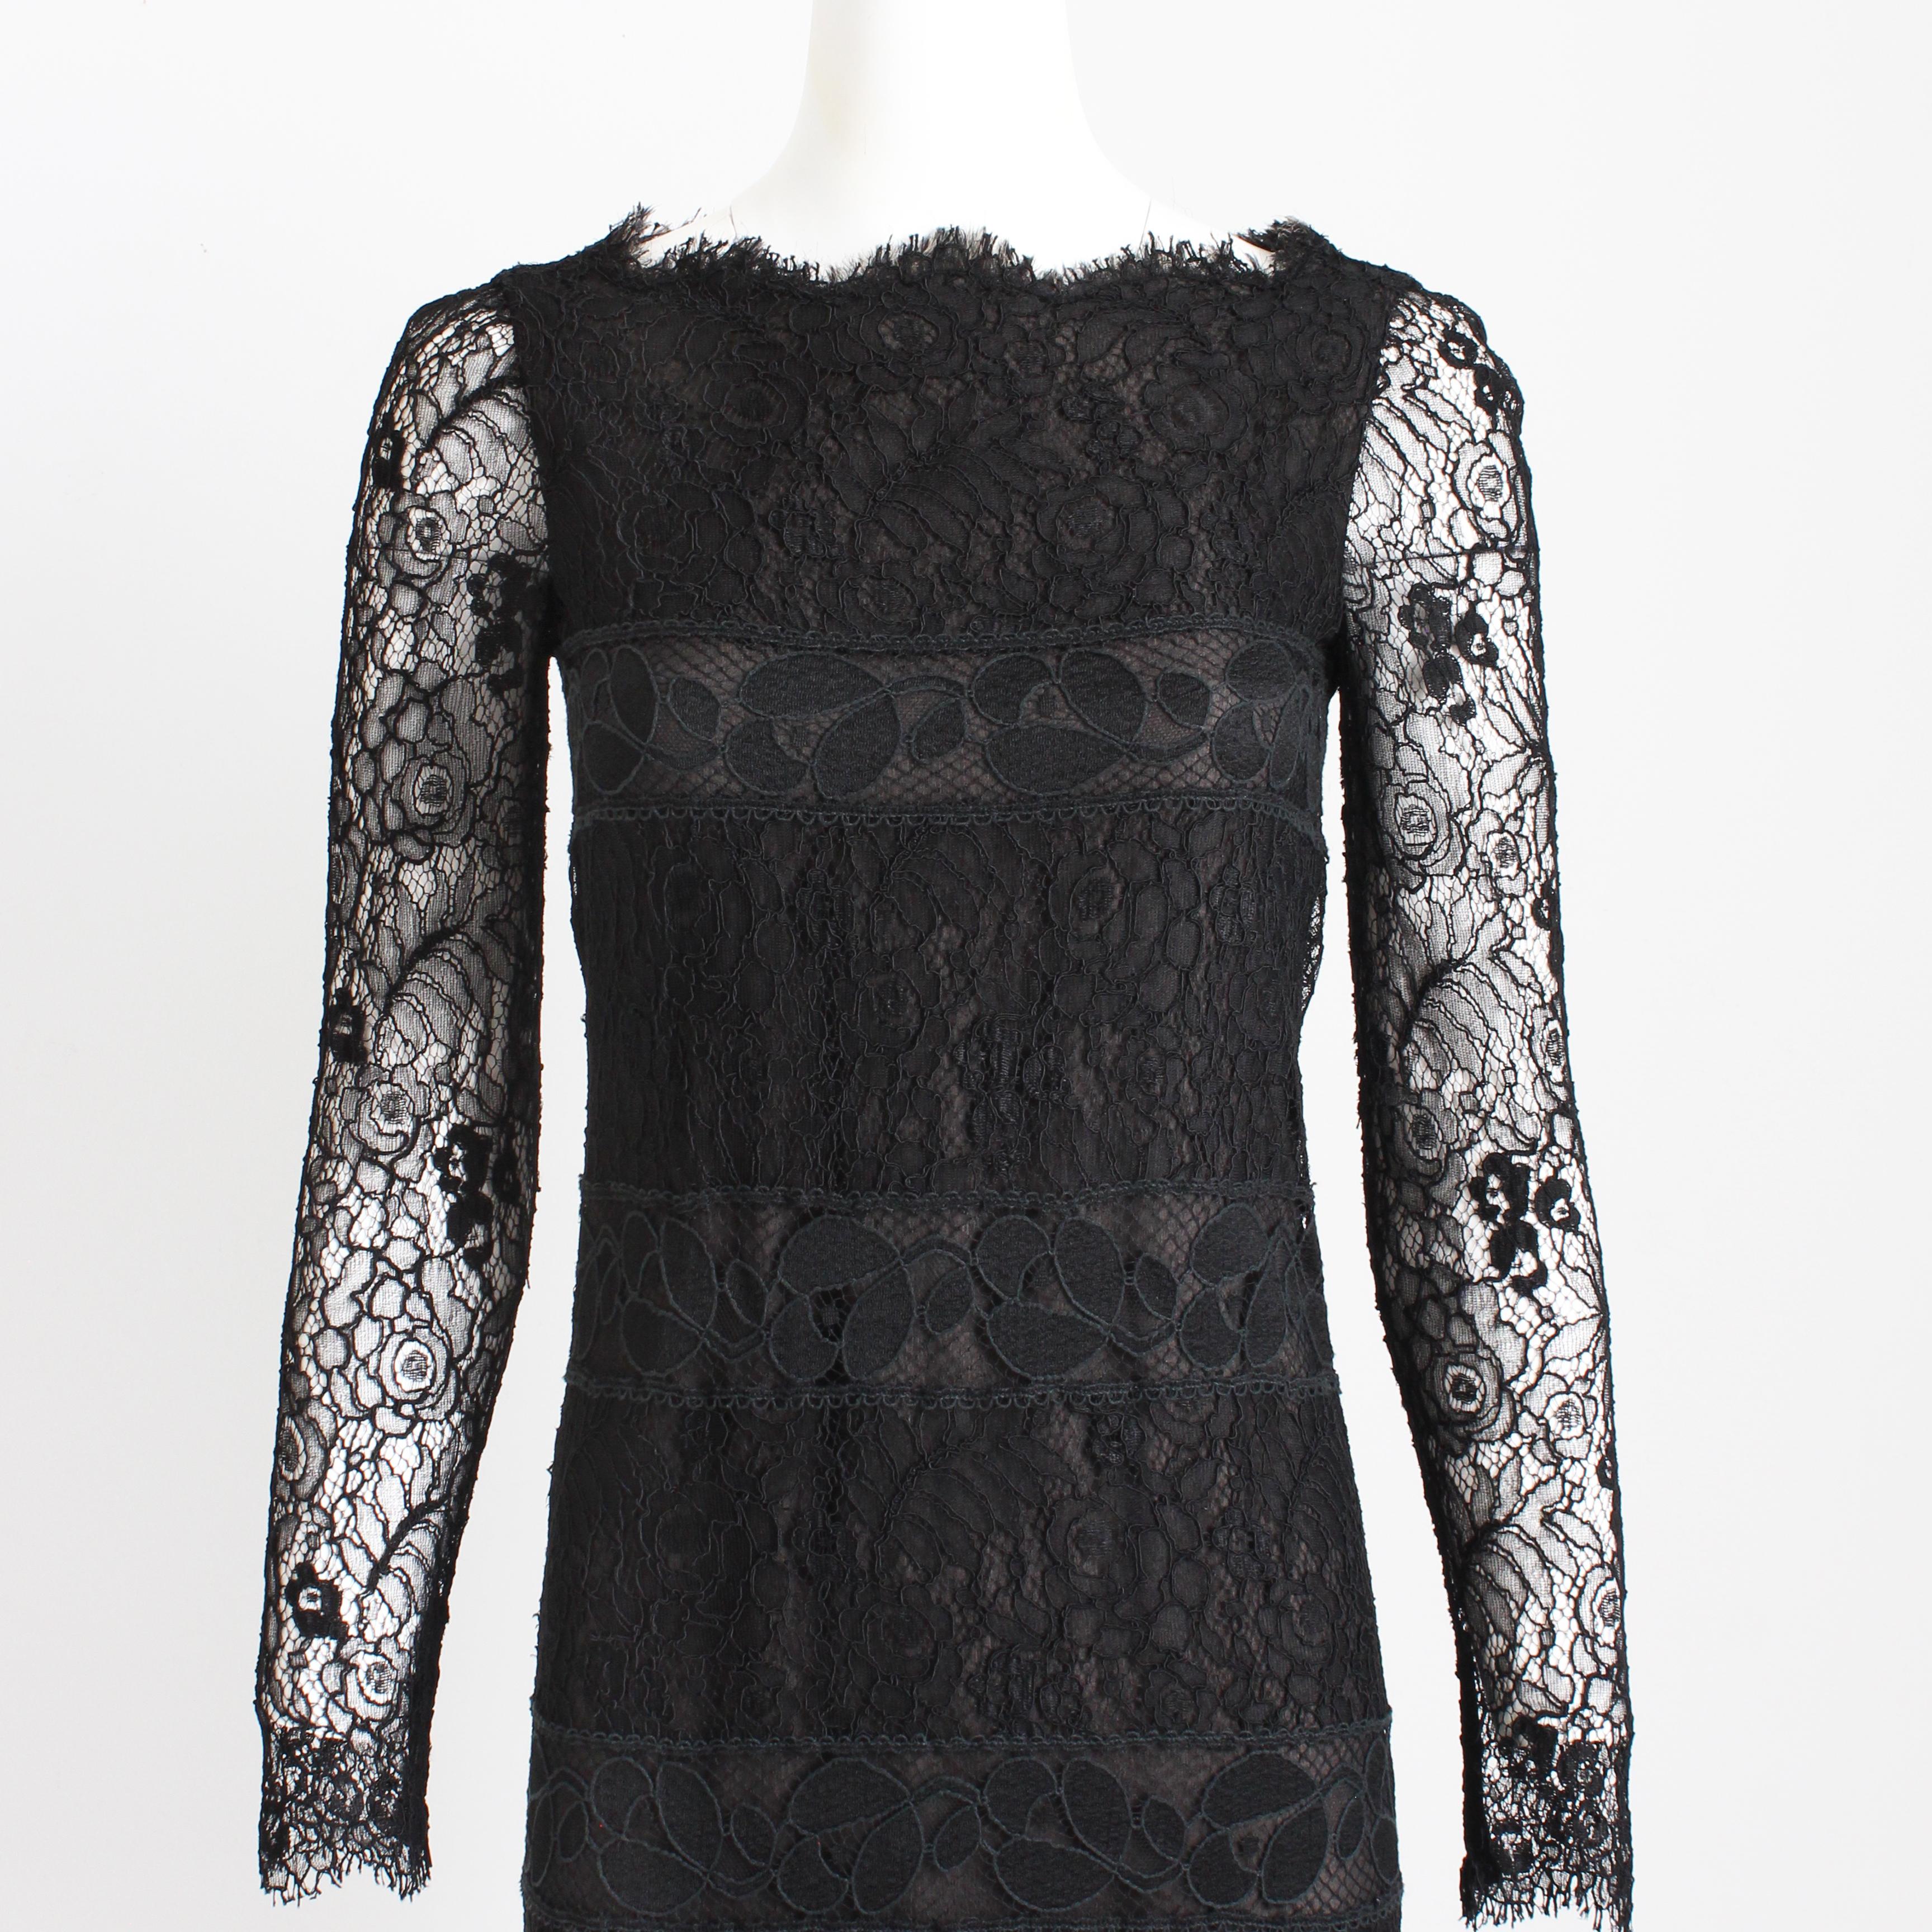 Chanel Couture Cocktail Dress Black Silk Guipure Lace Floral Numbered Vintage  In Good Condition For Sale In Port Saint Lucie, FL